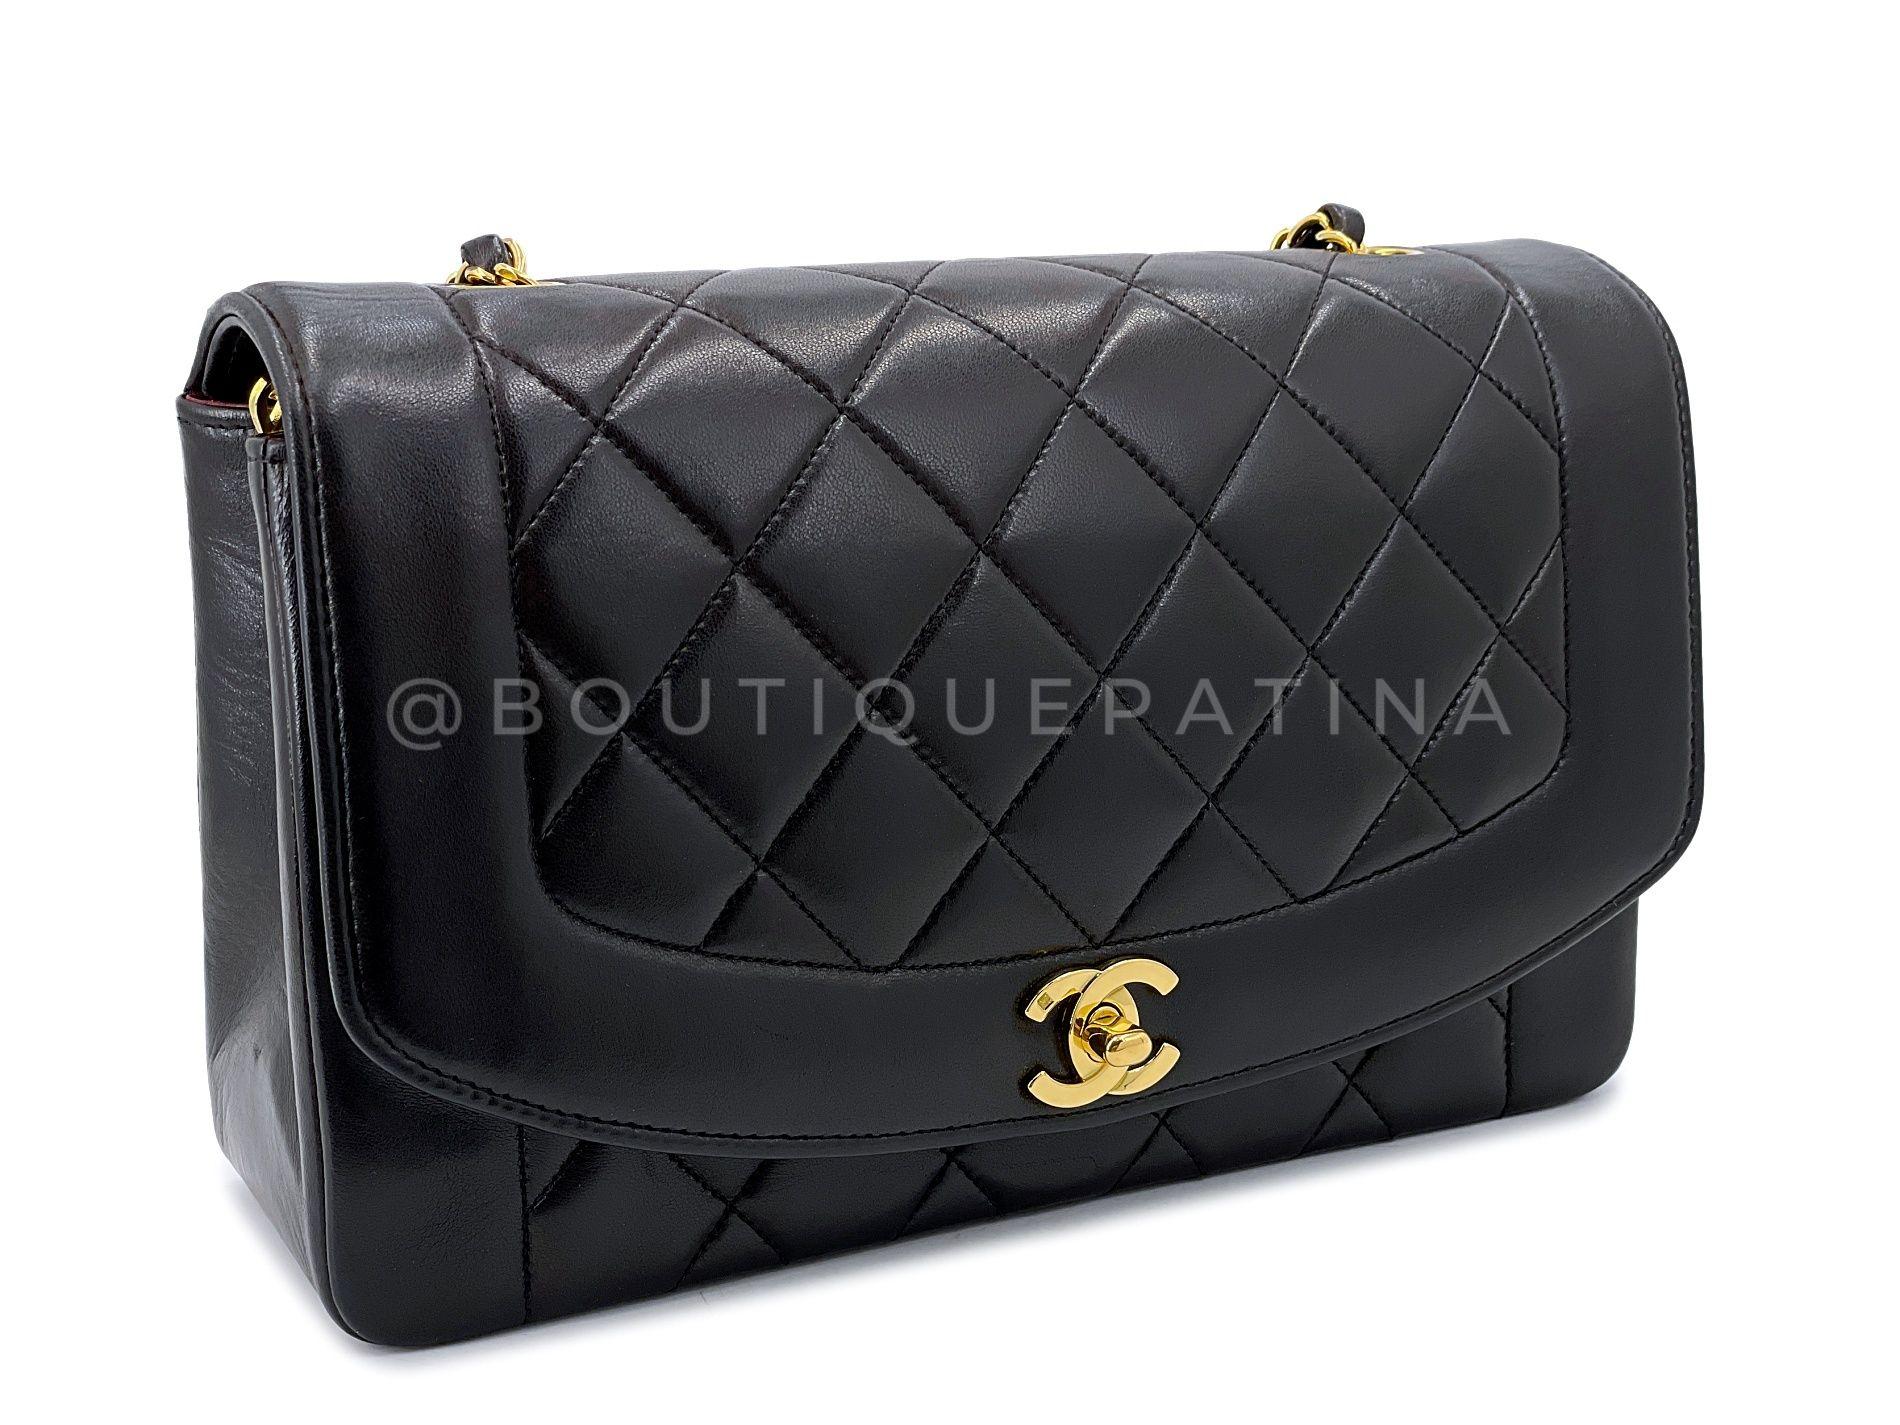 Chanel 1994 Vintage Black Lambskin Medium Diana Flap Bag 24k GHW 64411 In Excellent Condition For Sale In Costa Mesa, CA